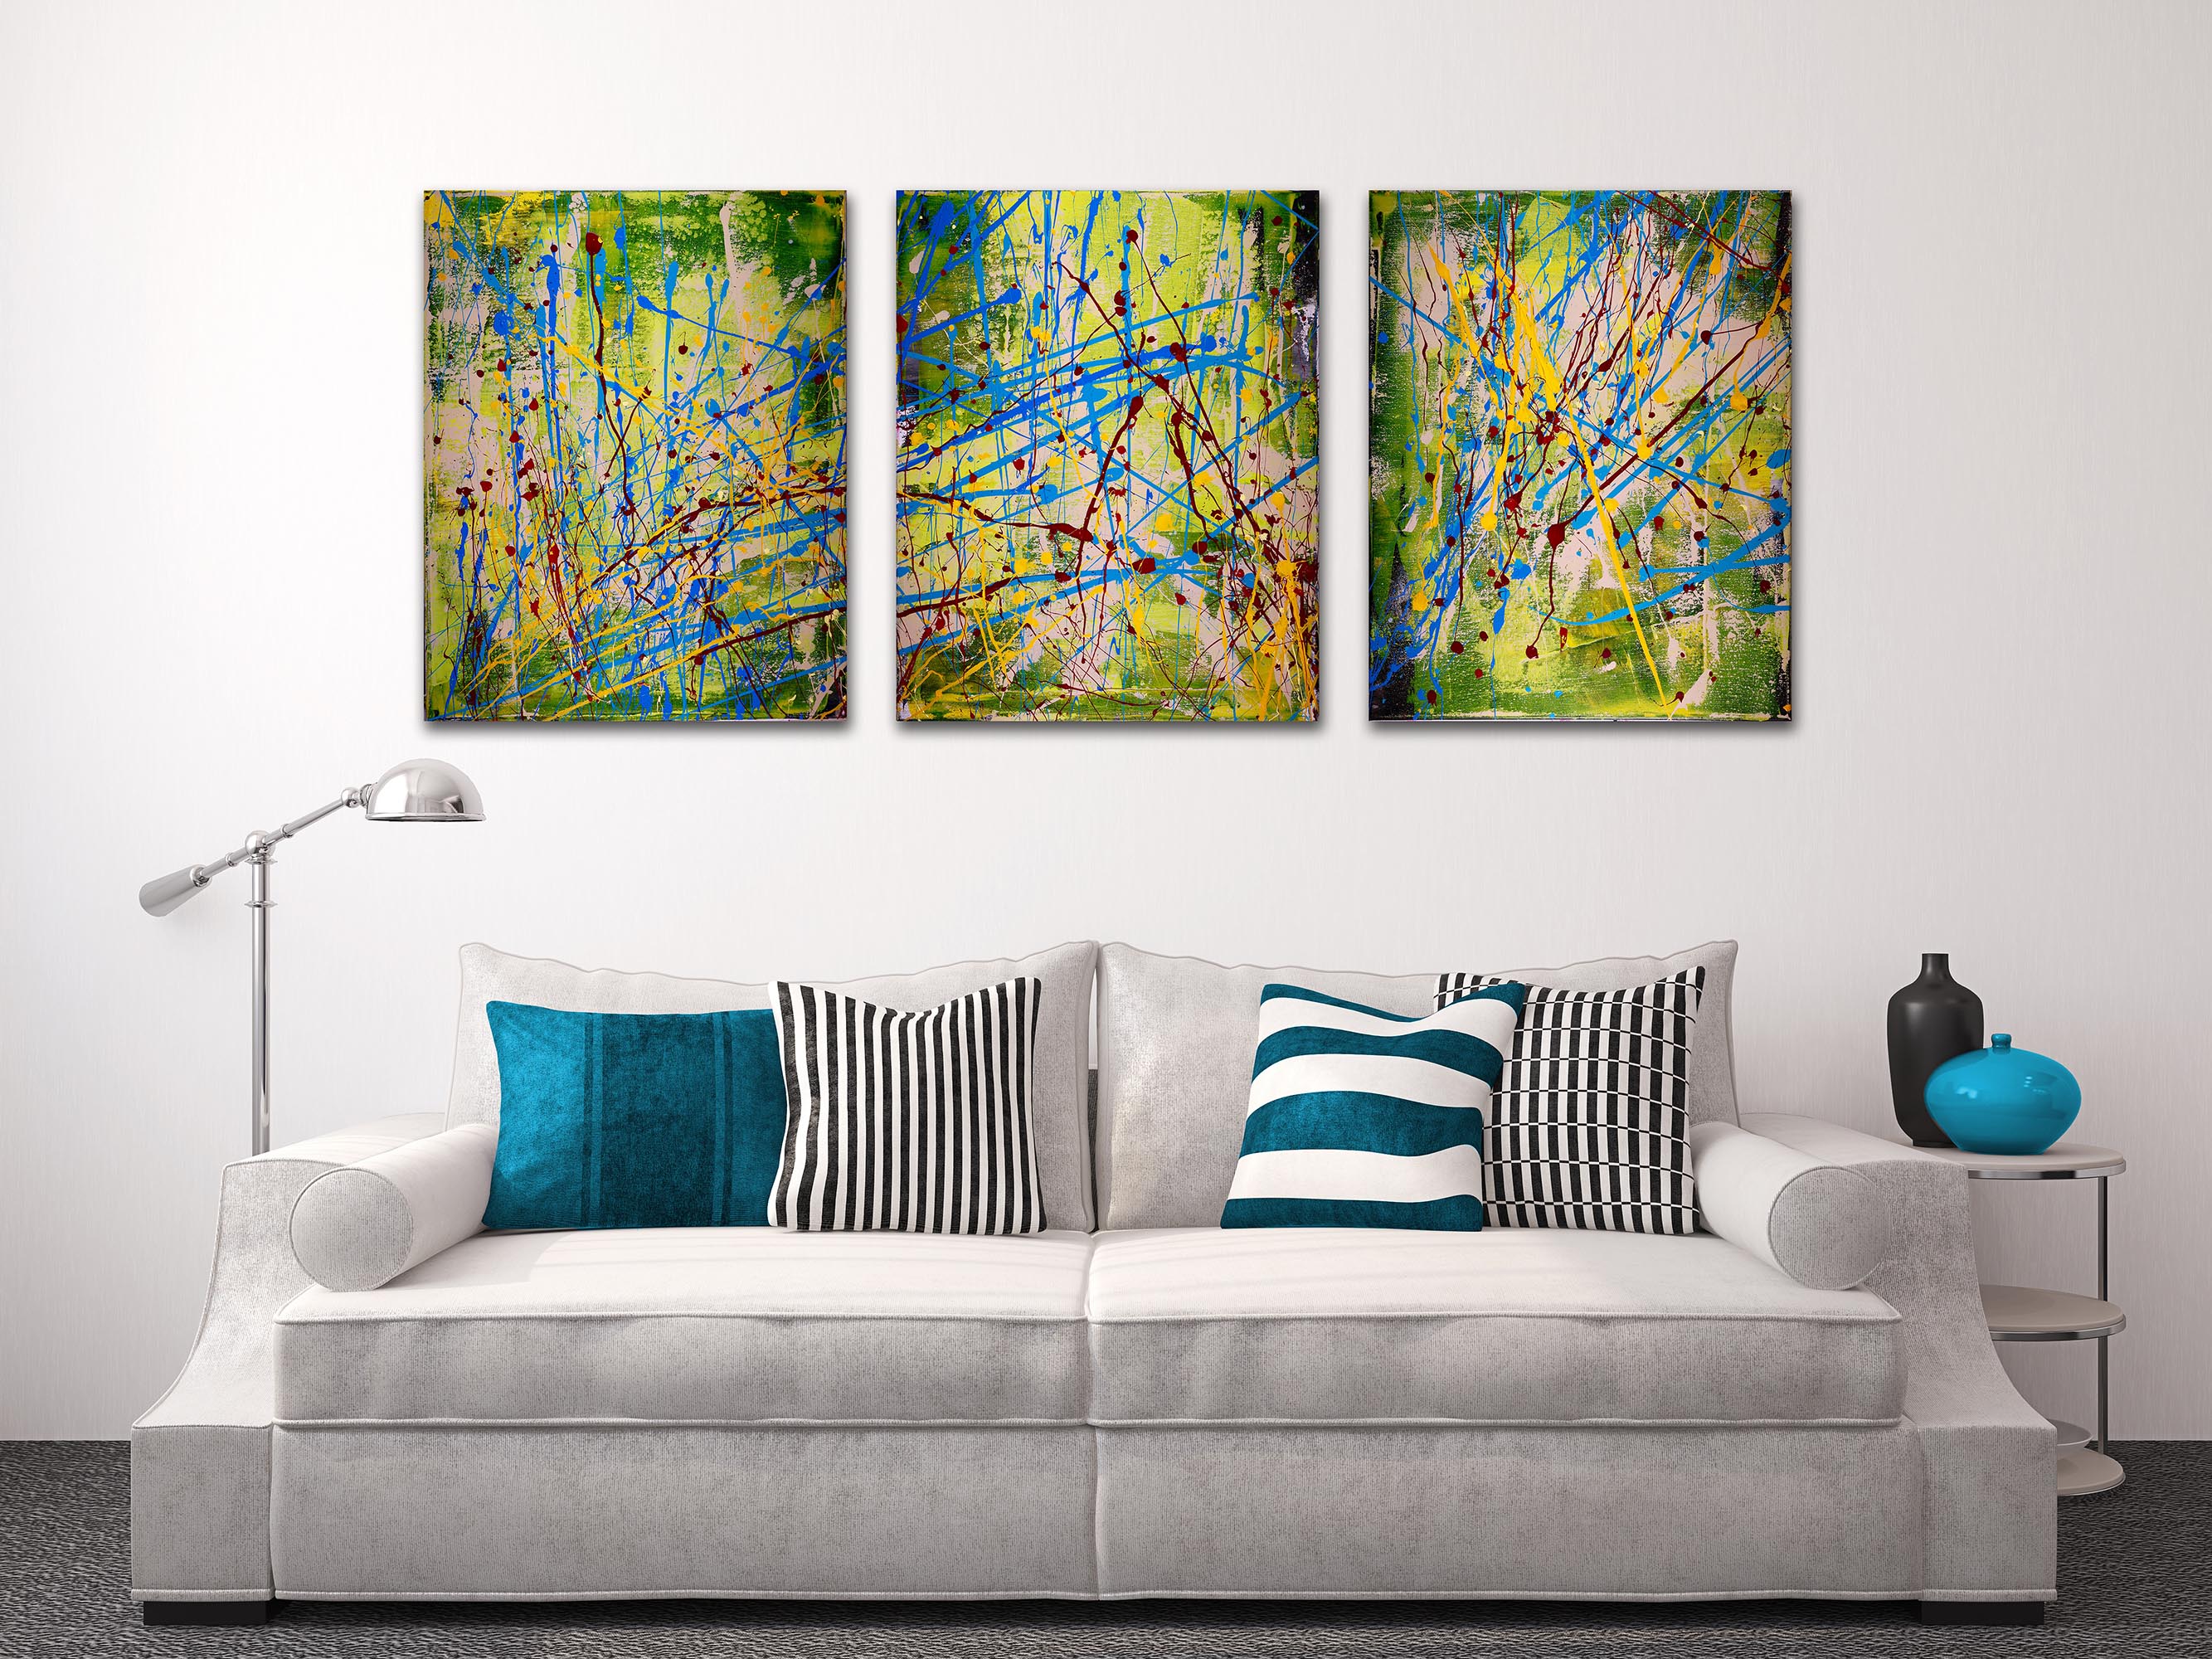 SOLD - artwork - Interrupted abstract landscape I- Tryptic (2016) by abstract artist Los Angeles Painter Nestor Toro